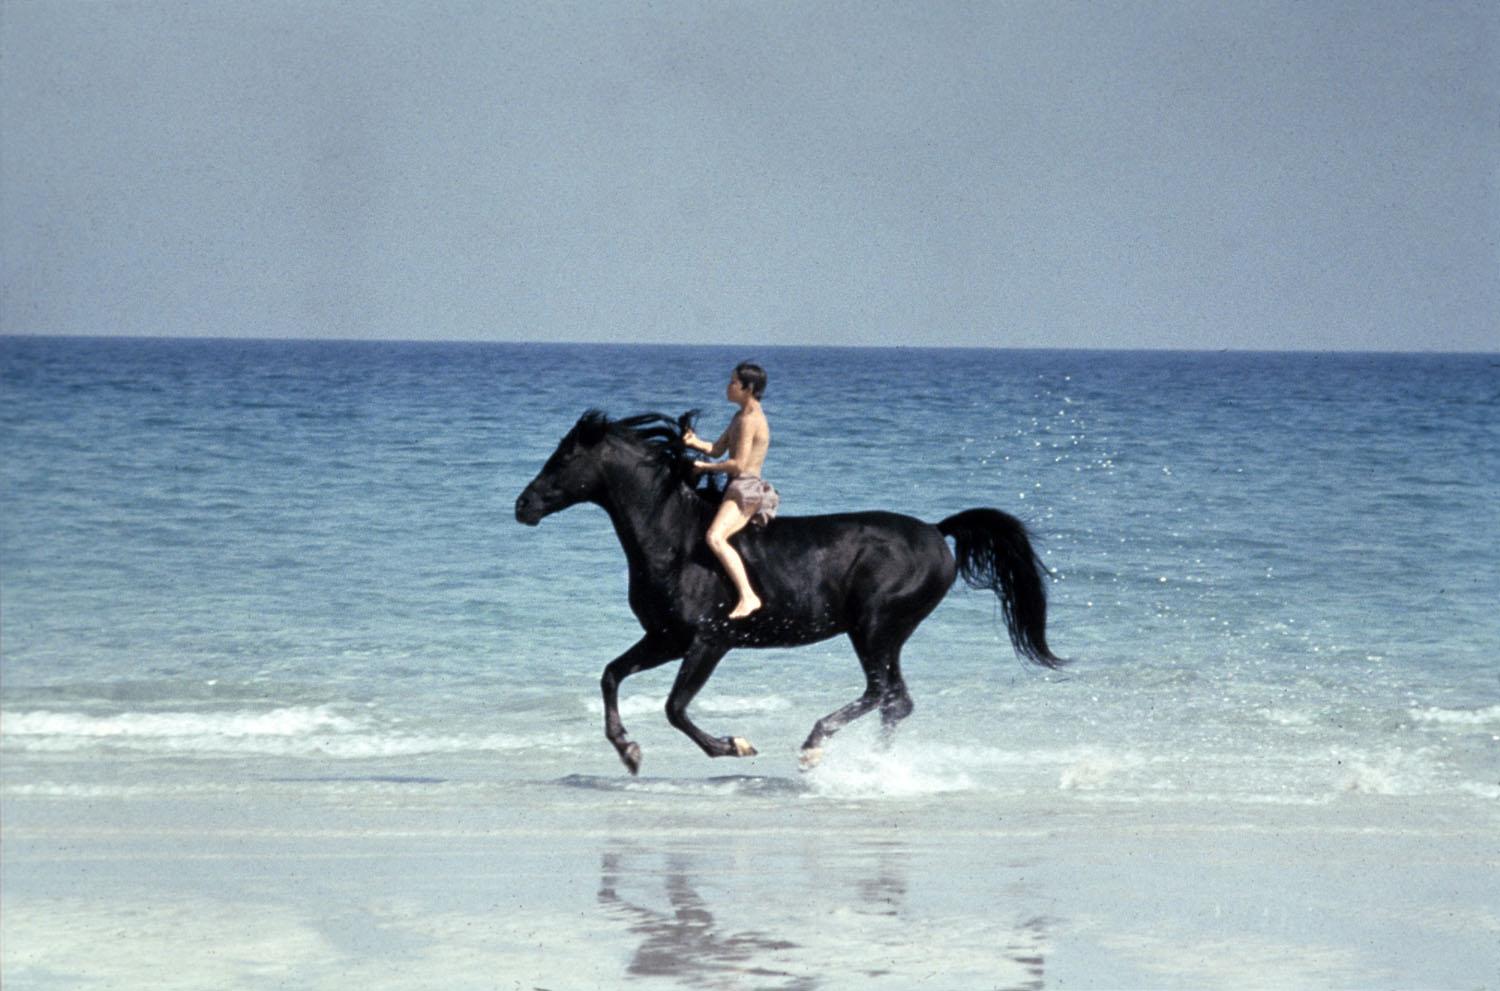 Black stallion - - High Quality and Resolution Wallpapers